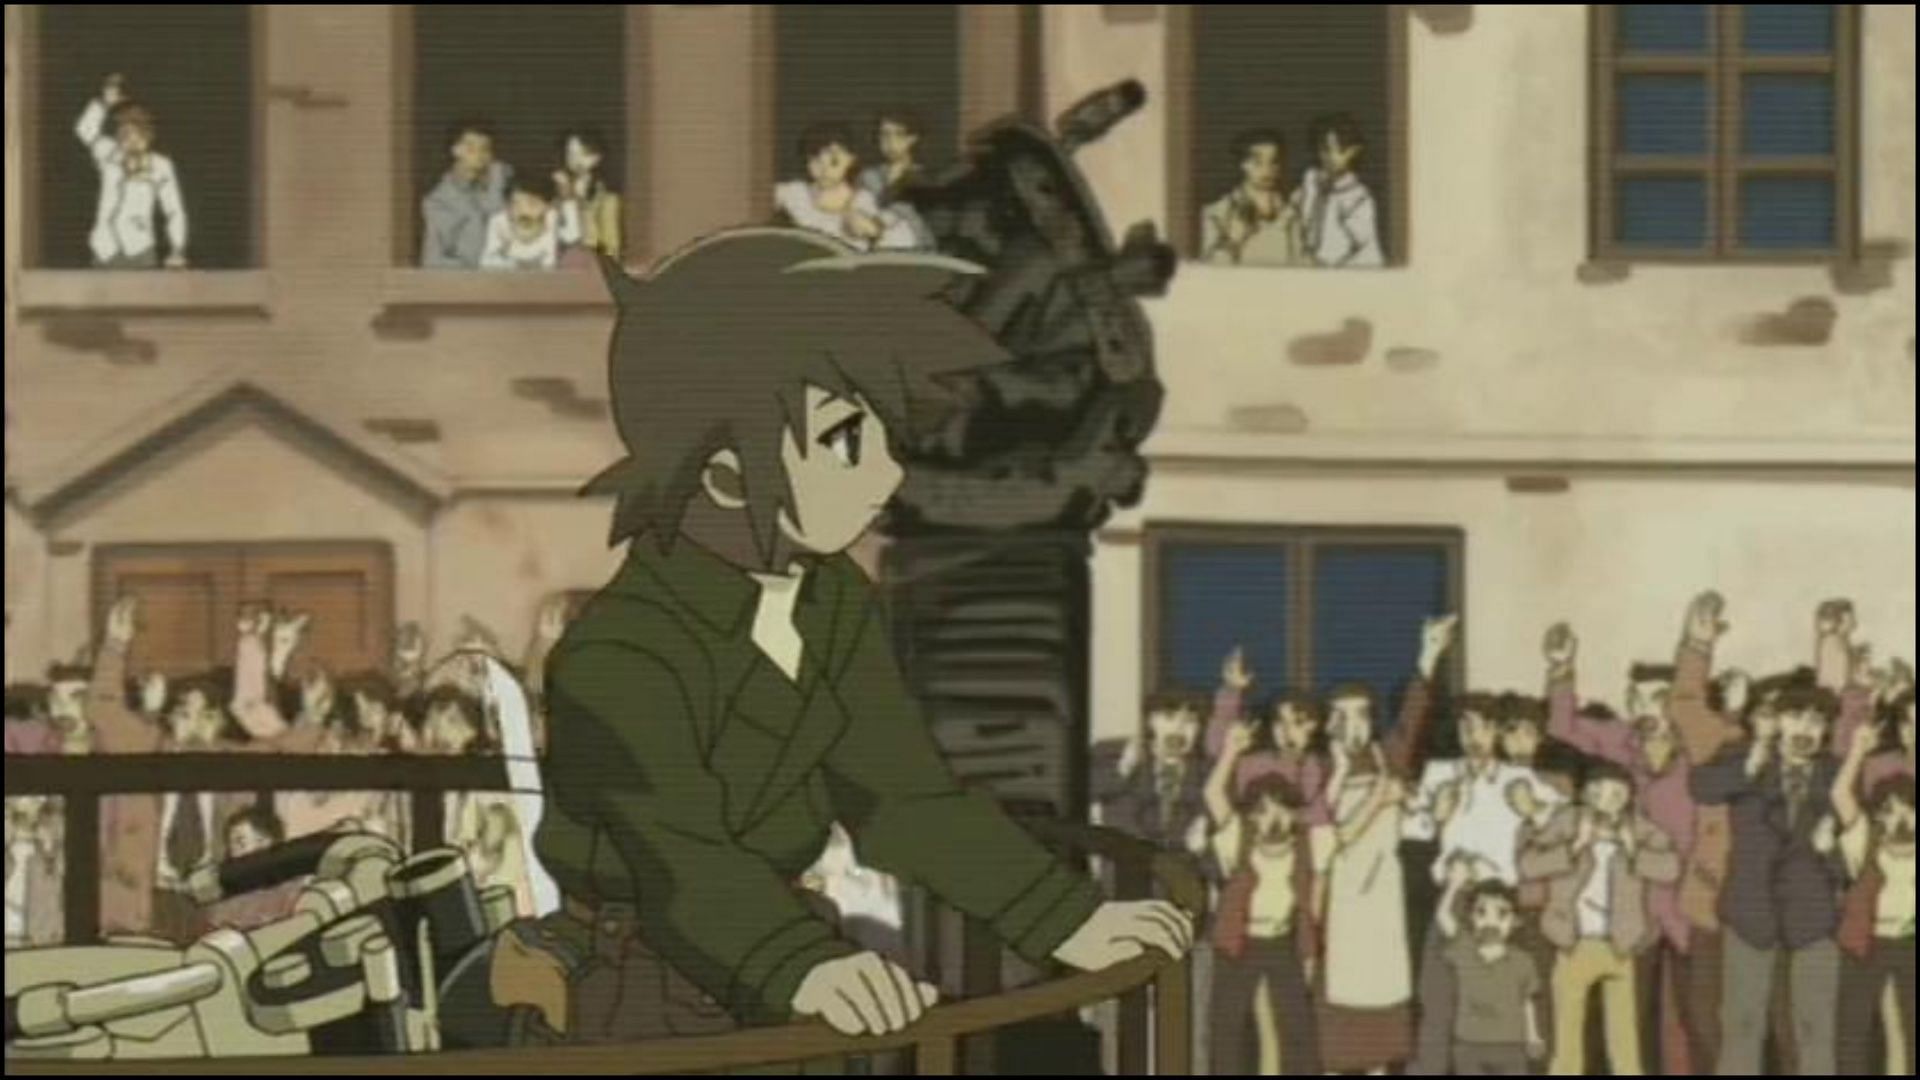 Kino's Journey: Where to Watch and Stream Online